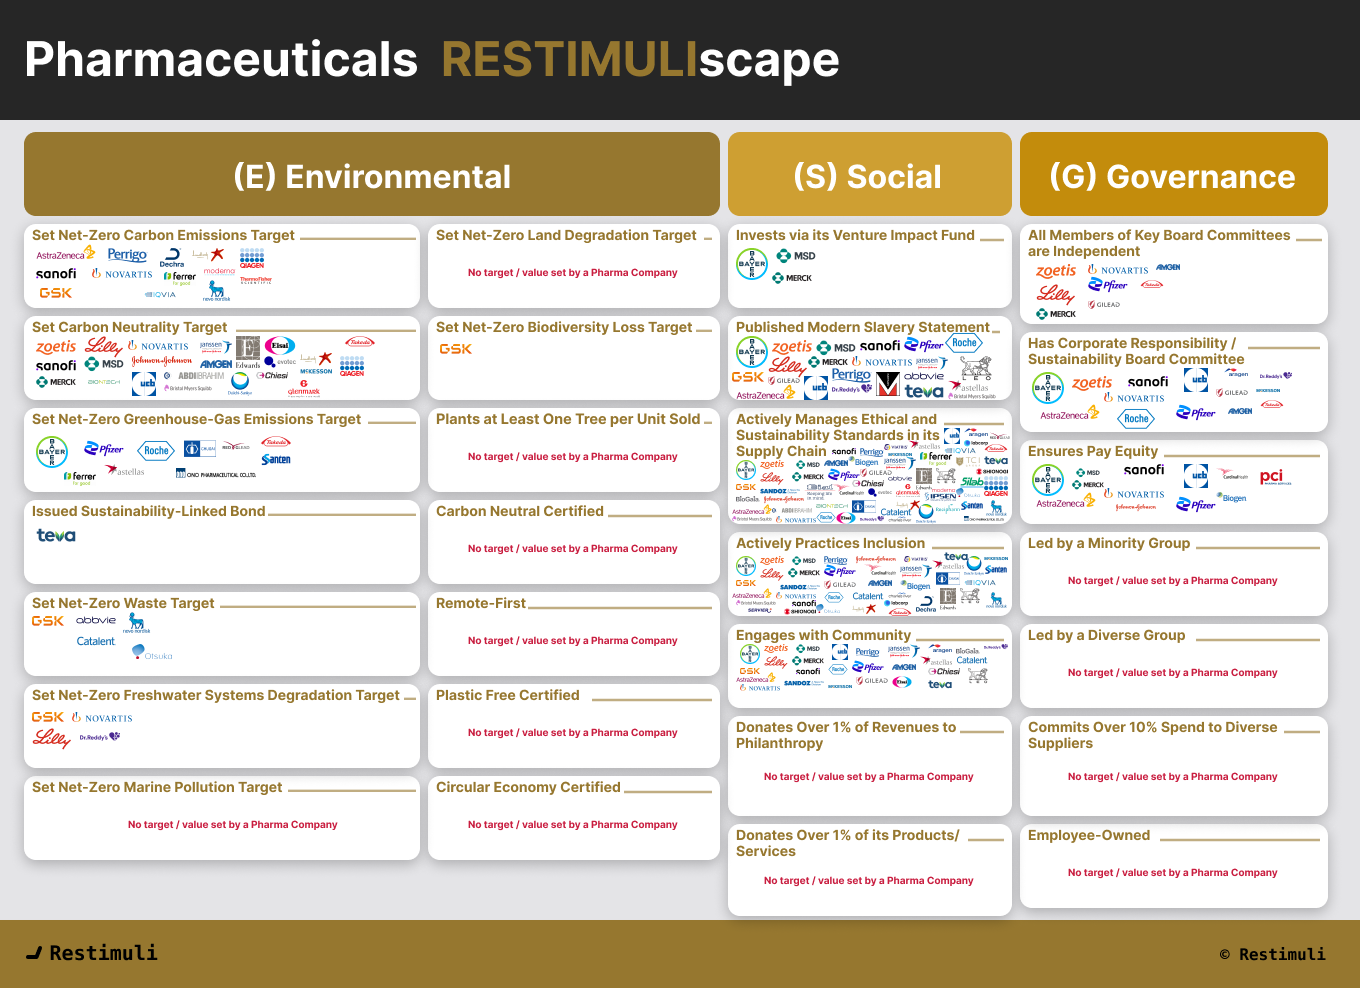 RESTIMULIscape: The First Version of Our ESG Market Map is Now Live!